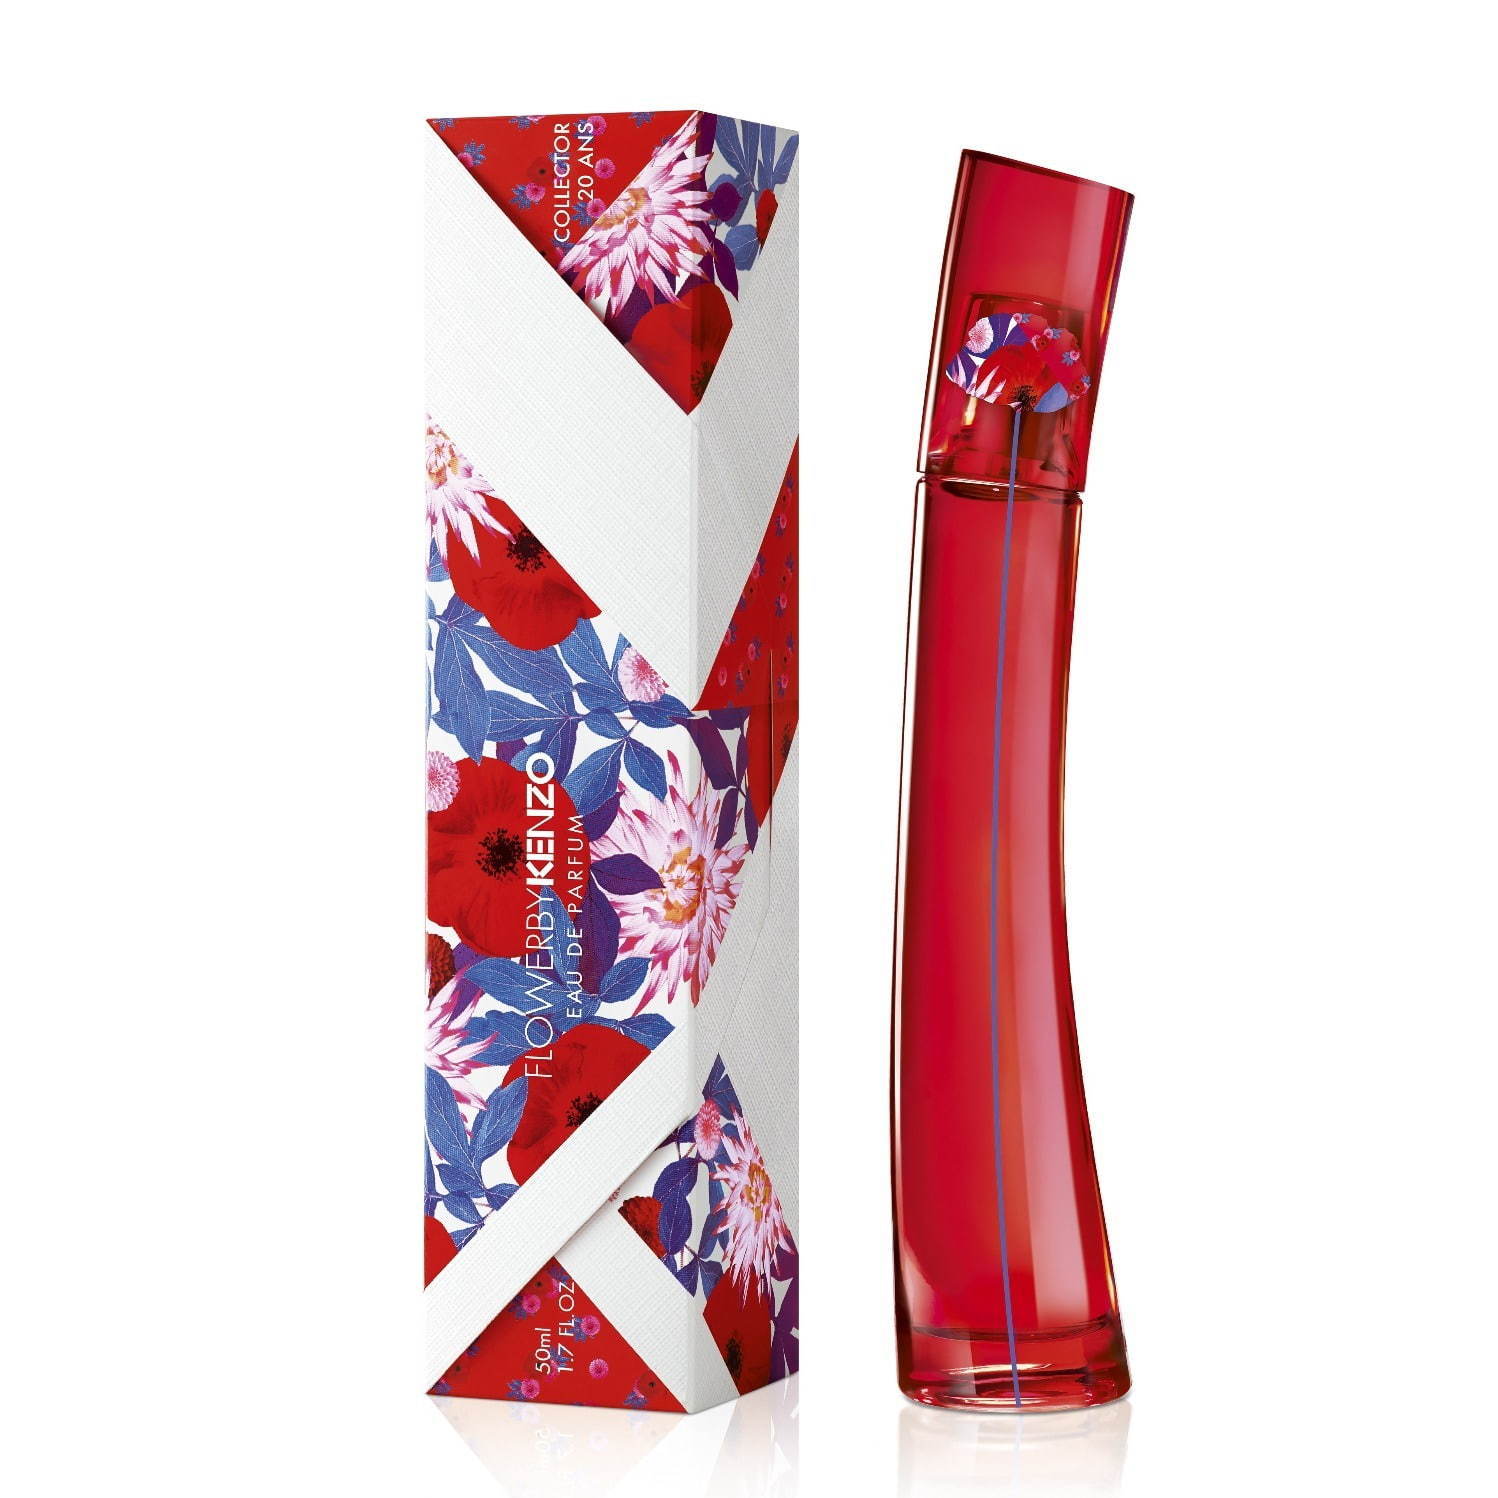 Flower by Kenzo 20th Anniversary Edition Kenzo perfume - a fragrance for women 2020